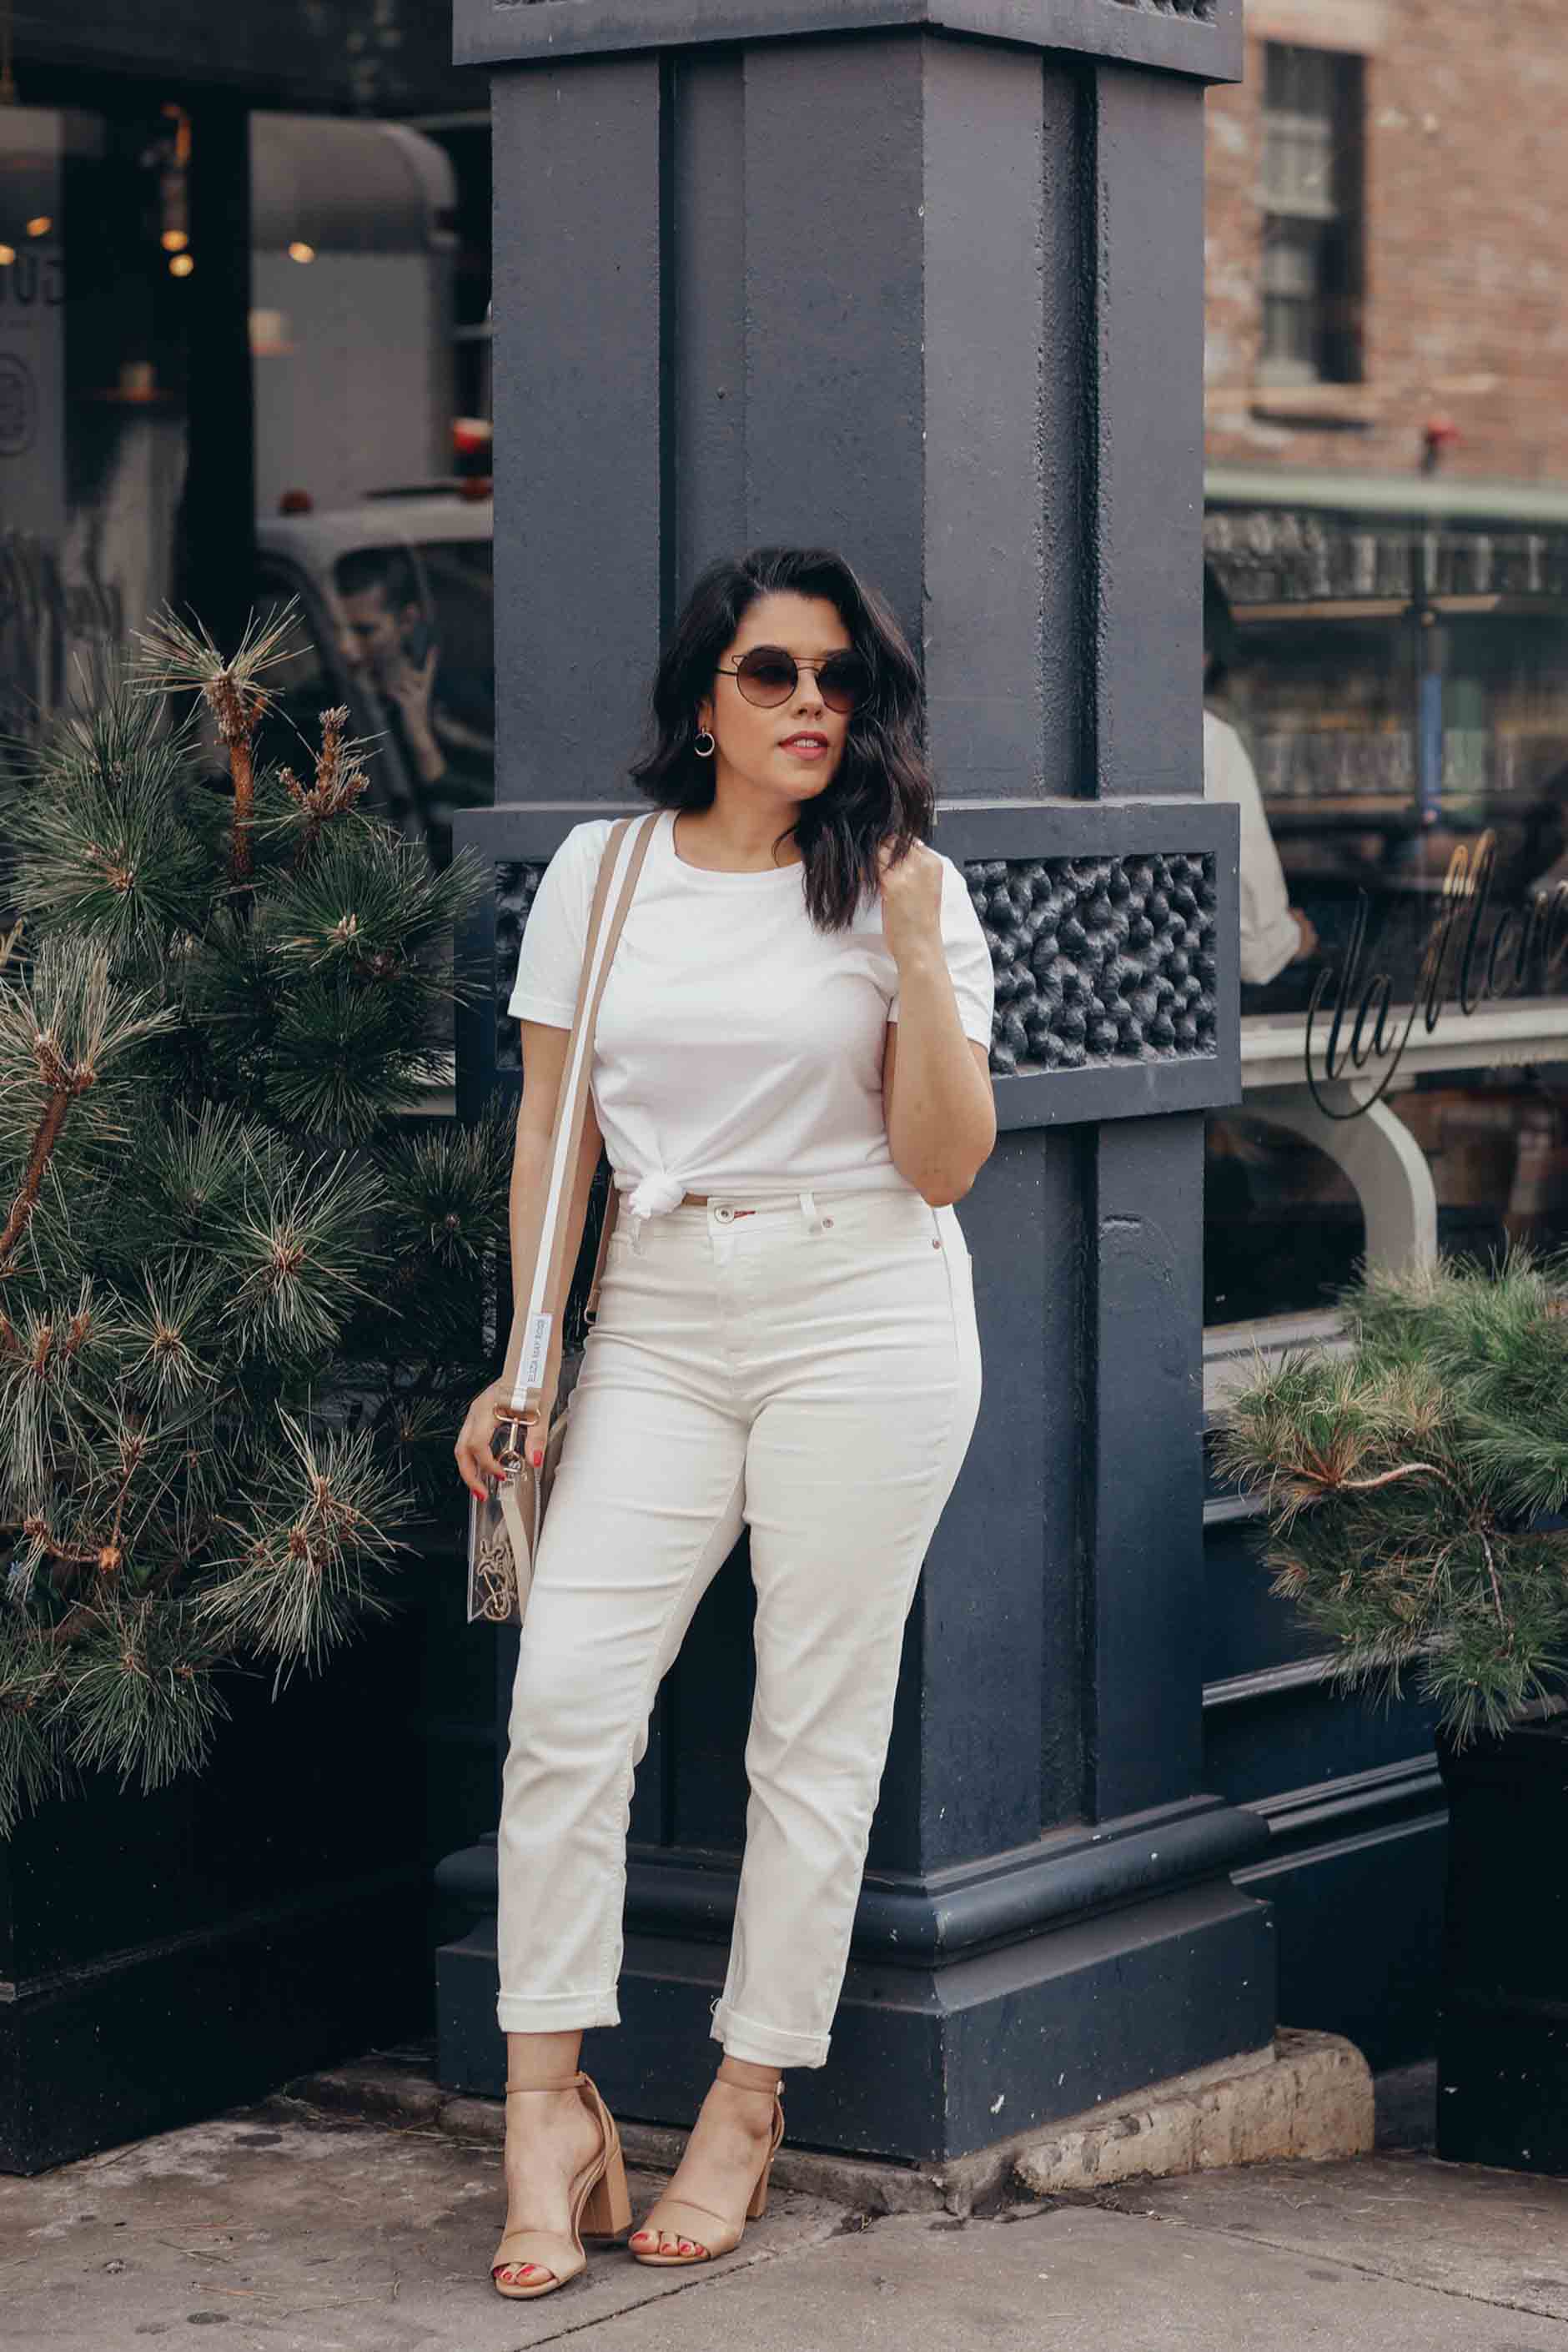 naty michele wearing a white outfit for we dress america